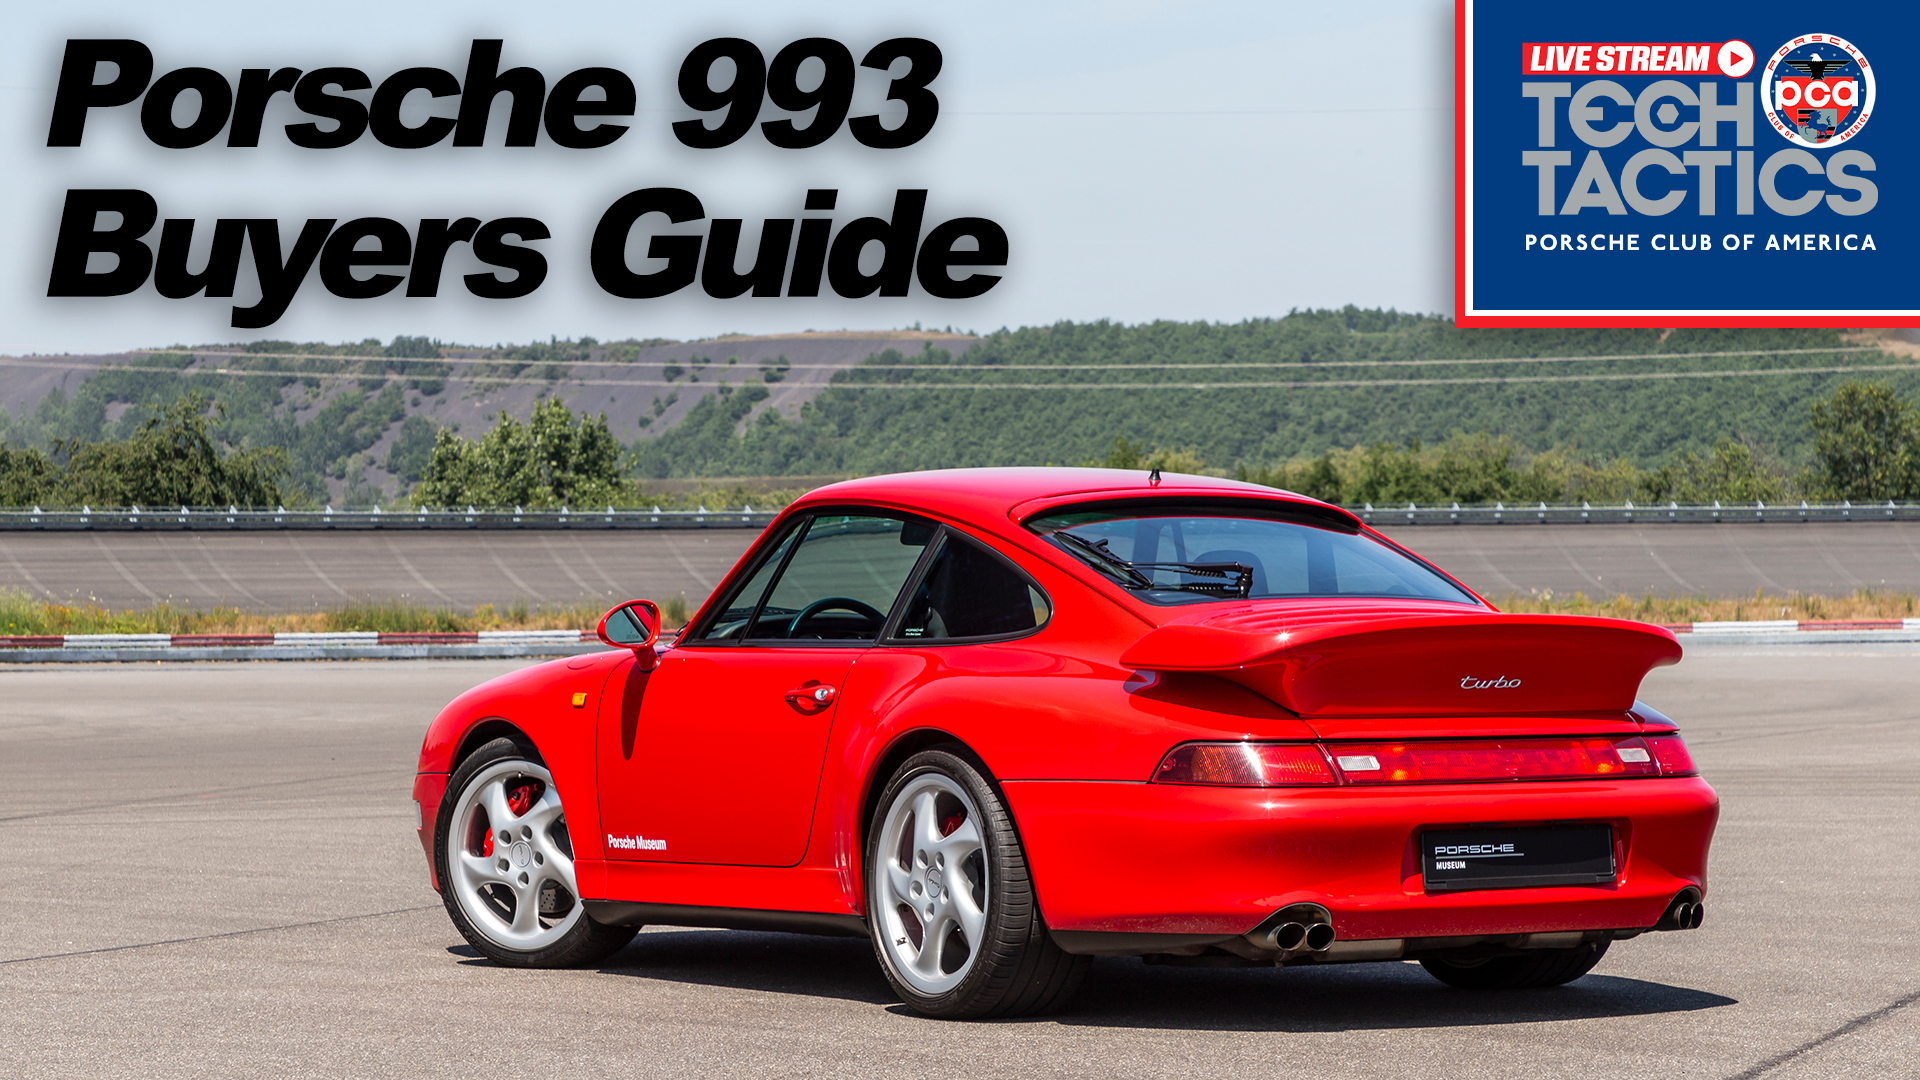 Porsche Club of America - Porsche 993 Buyers Guide <div><div><p>Racer Scott Sharp has certainly made his mark in motorsports -- 147 races in IndyCar, with nine wins and a co-championship, plus championships in the Trans-Am and American Le Mans Series, where he still races with the Extreme Speed Motorsports team he co-owns. However, there were three championships that launched his career into the pro ranks: He was the Sports Car Club of America National Champion in 1986 in both GT-1 and GT-2 and came back the following year to take another GT-1 title.</p><p>Those three championships came in the Runoffs, the season-ending, weeklong event that caps SCCA amateur racing every year and has for five decades: The 50th SCCA National Championship Runoffs was scheduled for Sept. 16-22 at Road America in Wisconsin. </p><p>“It's a huge anniversary for motorsports, given all the SCCA has done for club racing,” Sharp said. “It gave so many of us a start, and you're still able to enjoy affordable wheel-to-wheel competition, key items in racing. The fact that they're celebrating 50 years of the Runoffs is huge and hopefully the beginning of 50 more.”</p><p>Sharp was aware of the SCCA's place in the sport well before he began his own SCCA championship quest—his father has six National Championships of his own. Bob Sharp Racing technically began in 1964, the Runoff's inaugural year, and Bob took a then-unknown brand called Datsun to the race at Riverside International Raceway. Starting out in a Gulf gas station, Bob Sharp Racing continued to develop the brand, eventually selling Datsuns out of the station, then at his own full-fledged dealership. </p><p>And it wasn't just Bob Sharp winning SCCA races and National Championships for BSR, it was fellow up-and-comers like Elliott Forbes-Robinson, Jim Fitzgerald, Brad Frisselle, Sam Posey and a promising newcomer, actor Paul Newman, who went on to win four Runoffs National Championships of his own. </p><p>The Runoffs' 50th anniversary is, as expected, proving to be popular with the racers because of the event's historic nature. It is the last of five straight Runoffs at Road America before SCCA president and chairman Jeff Dahnert begins his quest to take the Runoffs on the road more often. The next three stops: Mazda Raceway in Laguna Seca in 2014 -- the first time the Runoffs have been out west since the Riverside days -- then Daytona International Speedway in 2015, and Mid-Ohio Sports Car Course in <a href=